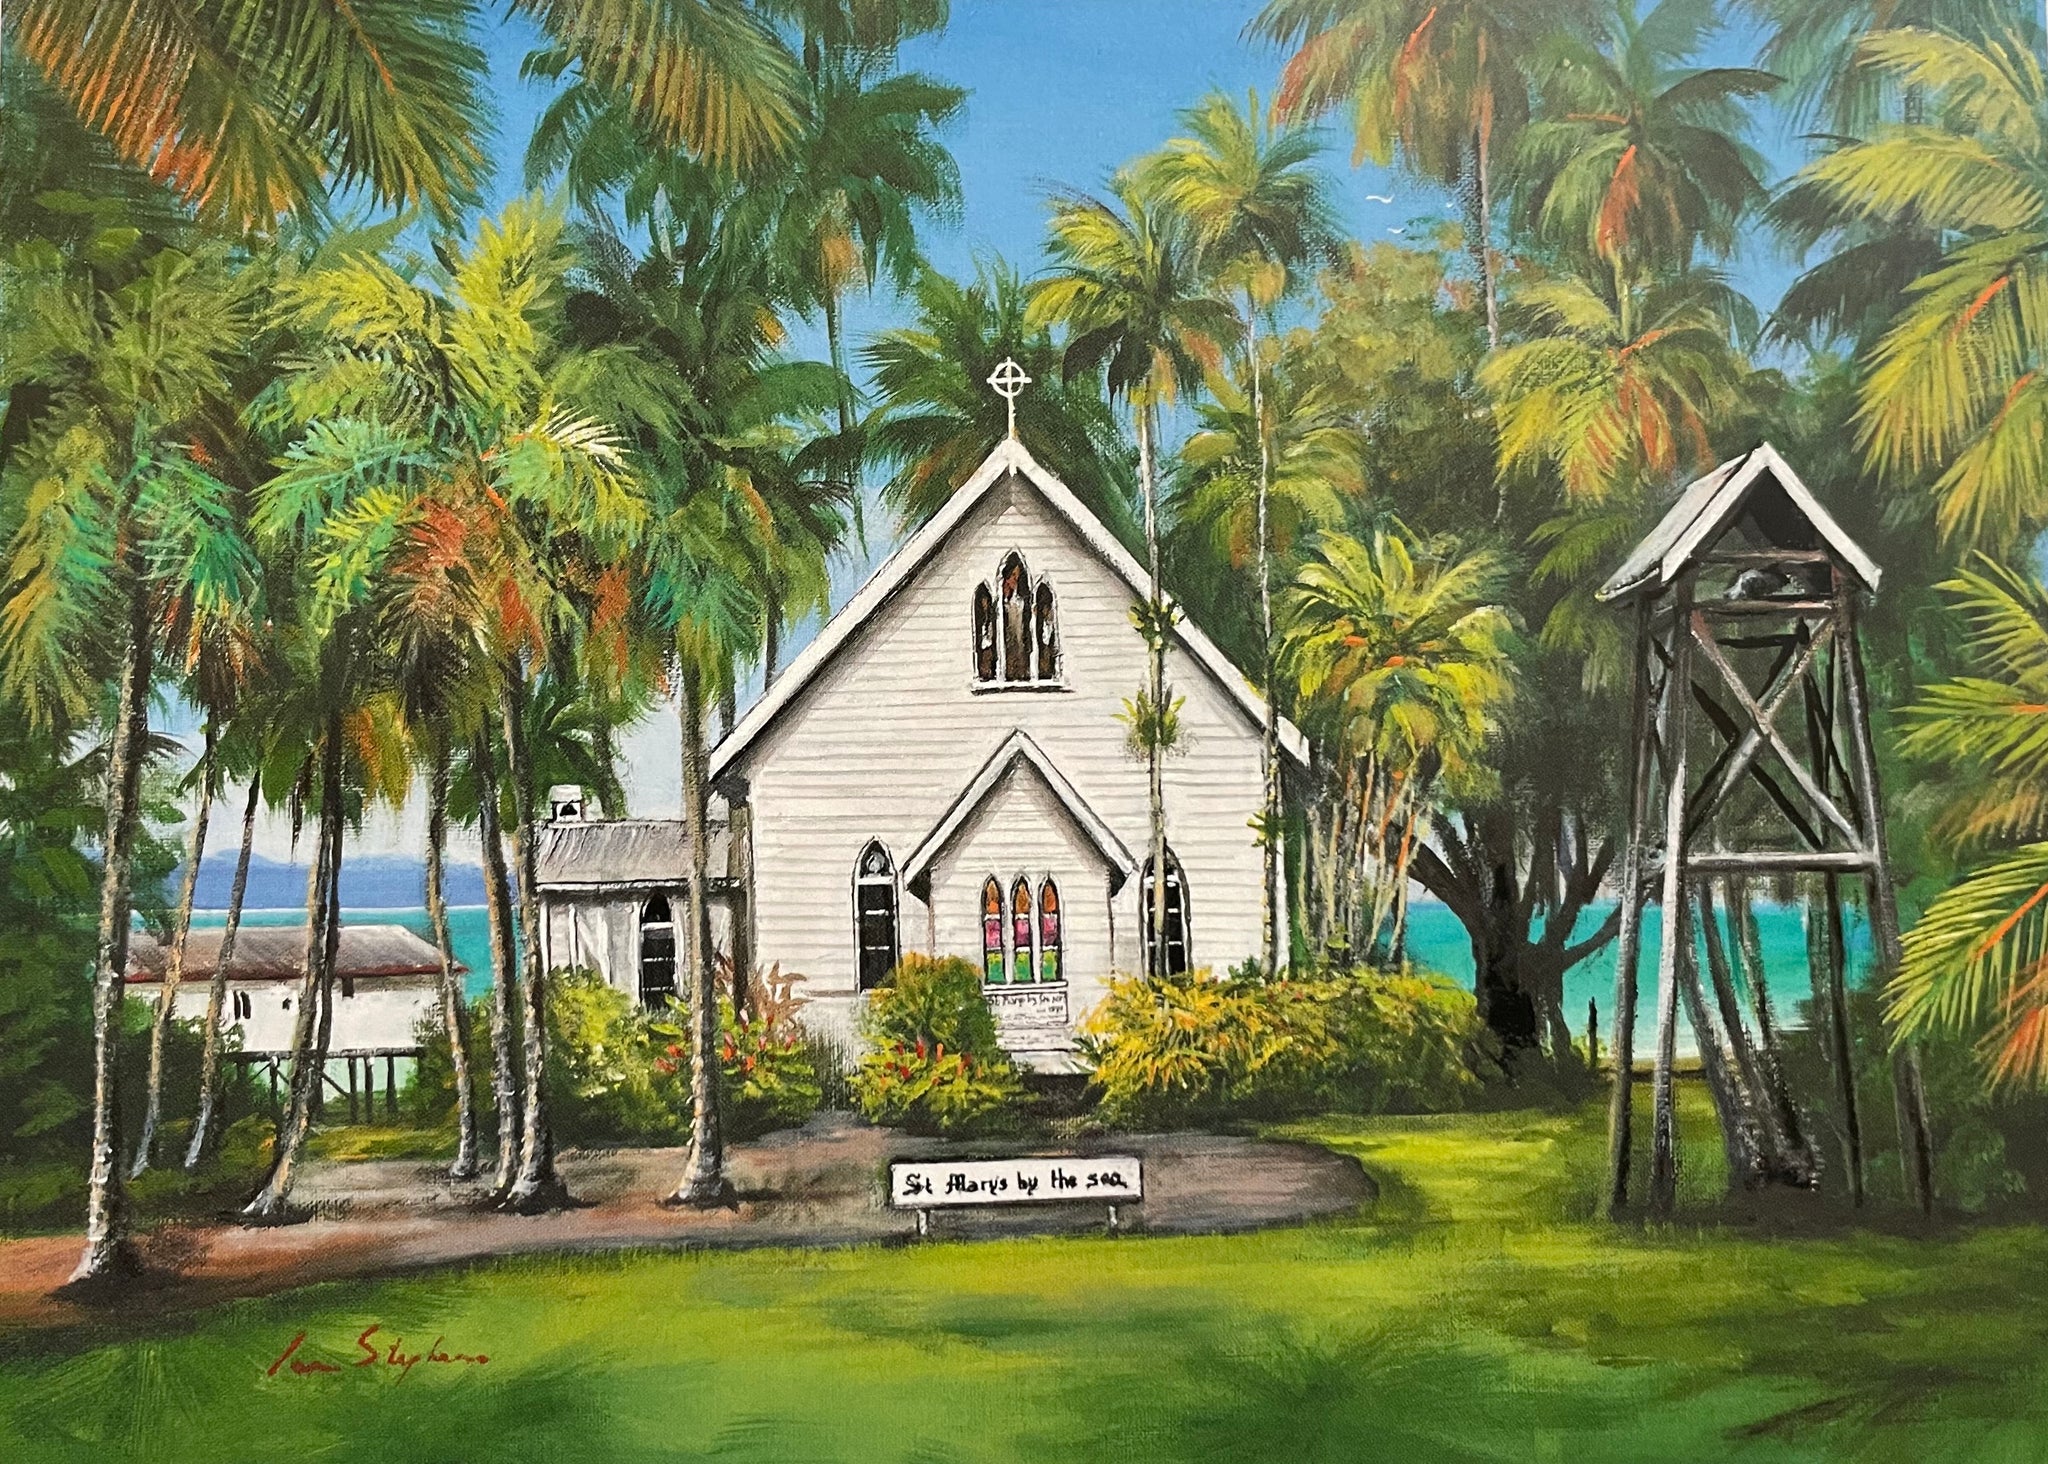 Ian Stephens - Local Australian Artist. Print on Card. Wedding favours and bombonieres for tropical Port Douglas weddings. Historical jetty overlooking the mouth of the Daintree River and towards the Heritage listed Daintree Rainforest. Tropical Far North Queensland, Perfect wedding ceremony chapel. Great Barrier Reef.